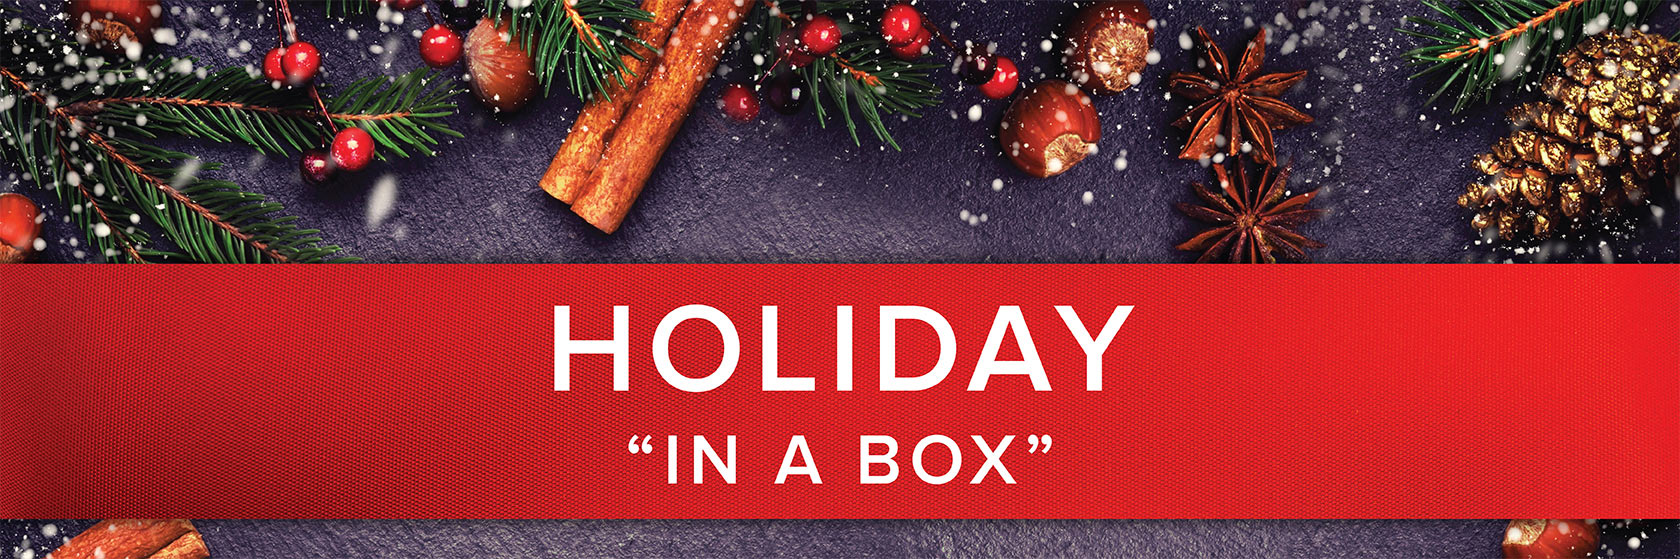 Holiday “In a Box” Request Confirmation